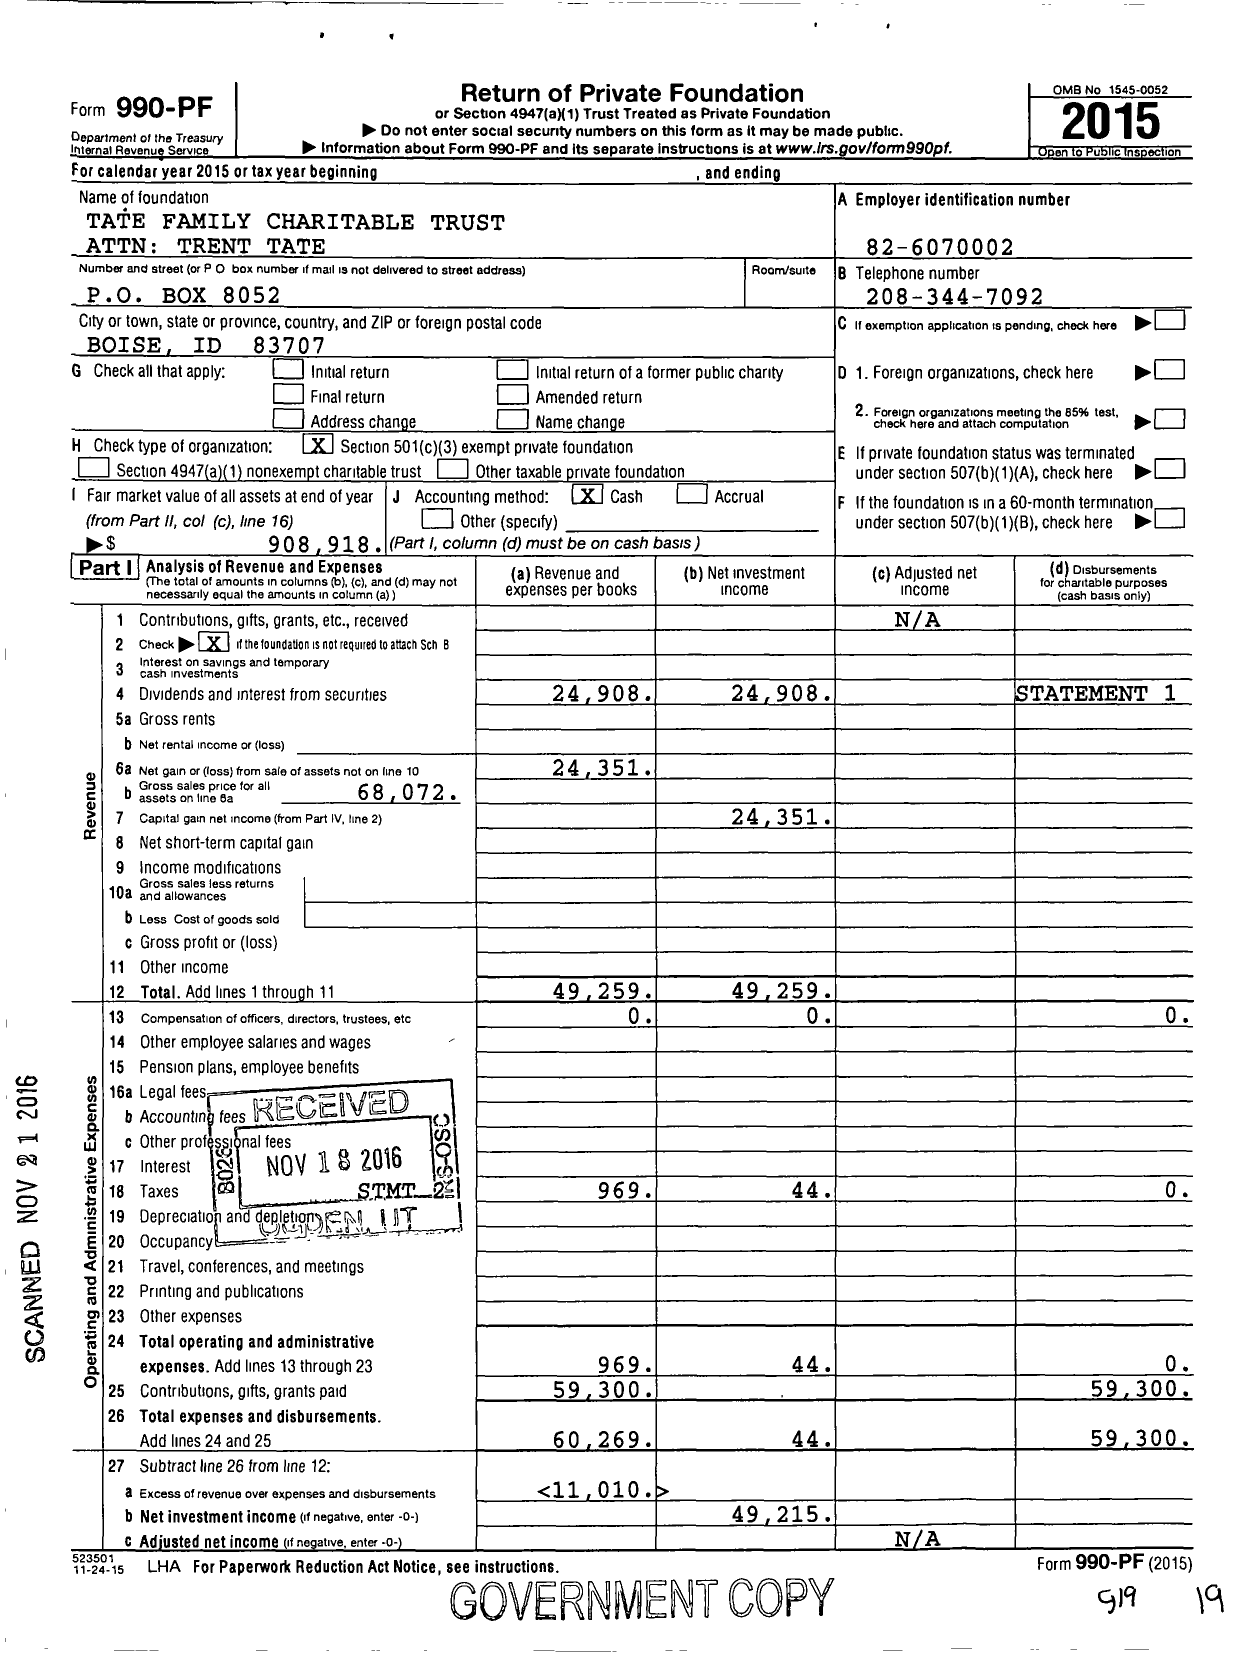 Image of first page of 2015 Form 990PF for Tate Family Charitable Trust Attn Trent Tate